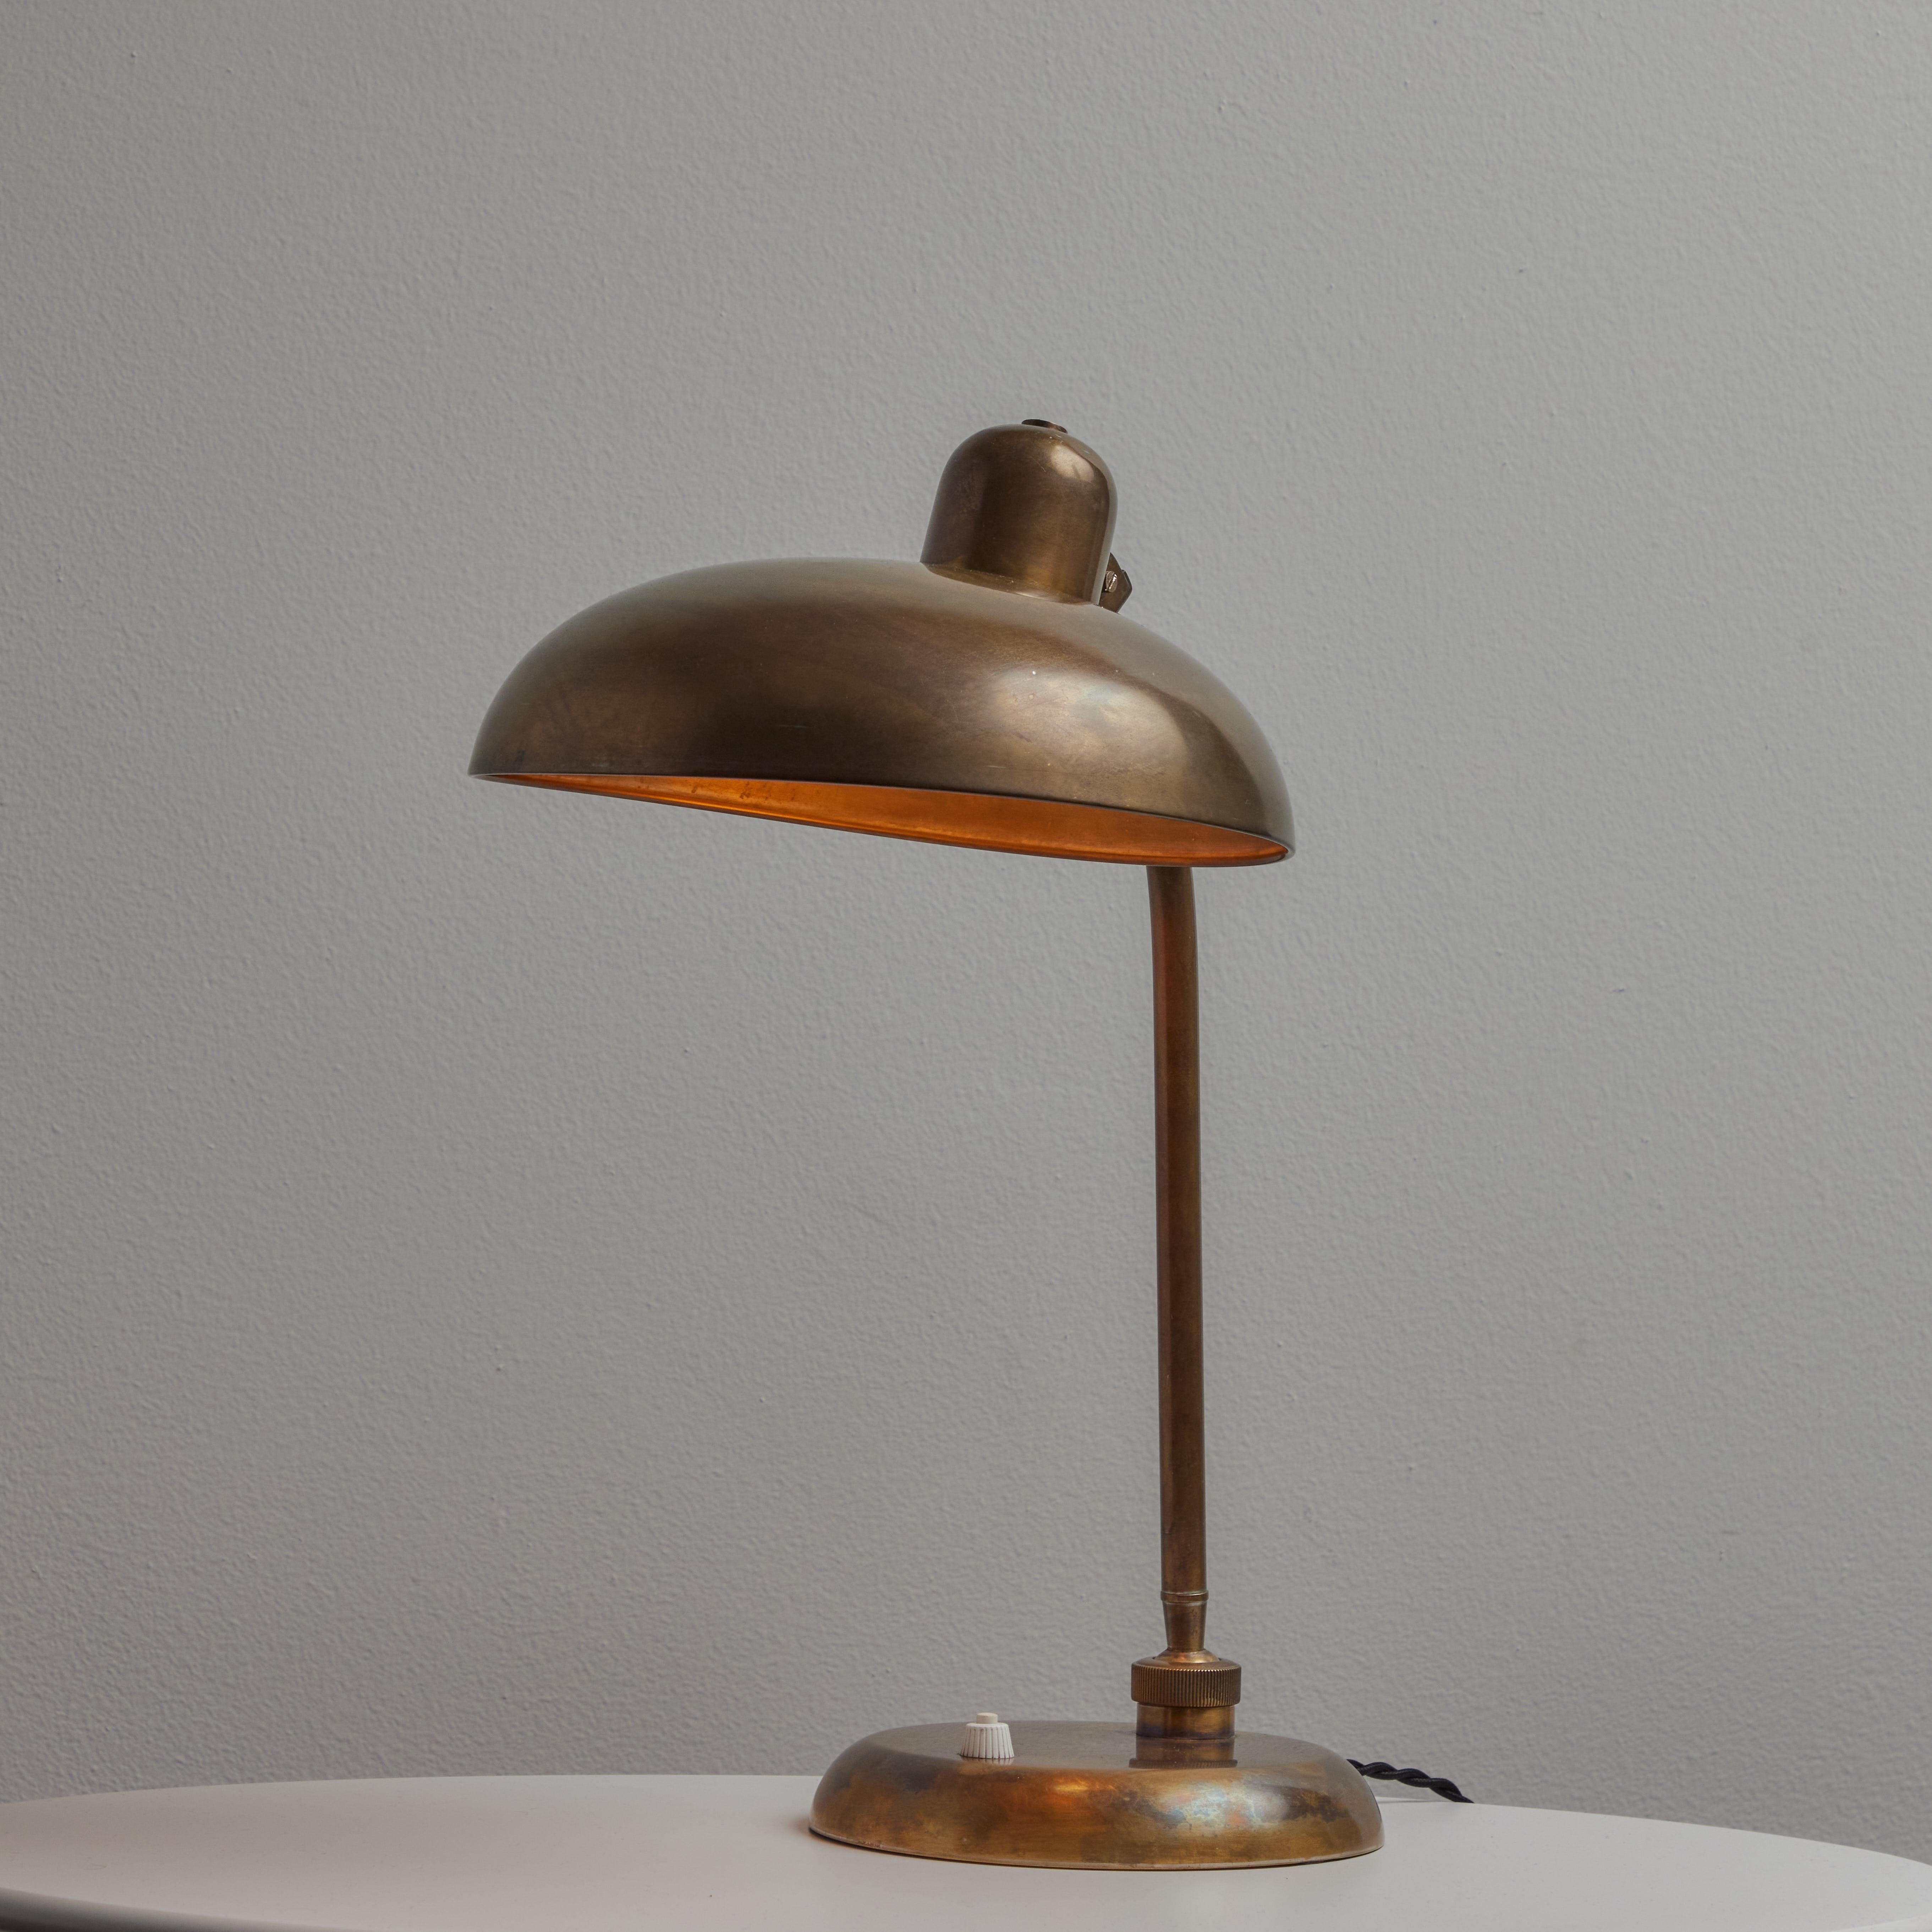 1940s Giovanni Michelucci Patinated Brass Ministerial Table Lamp for Lariolux In Good Condition For Sale In Glendale, CA